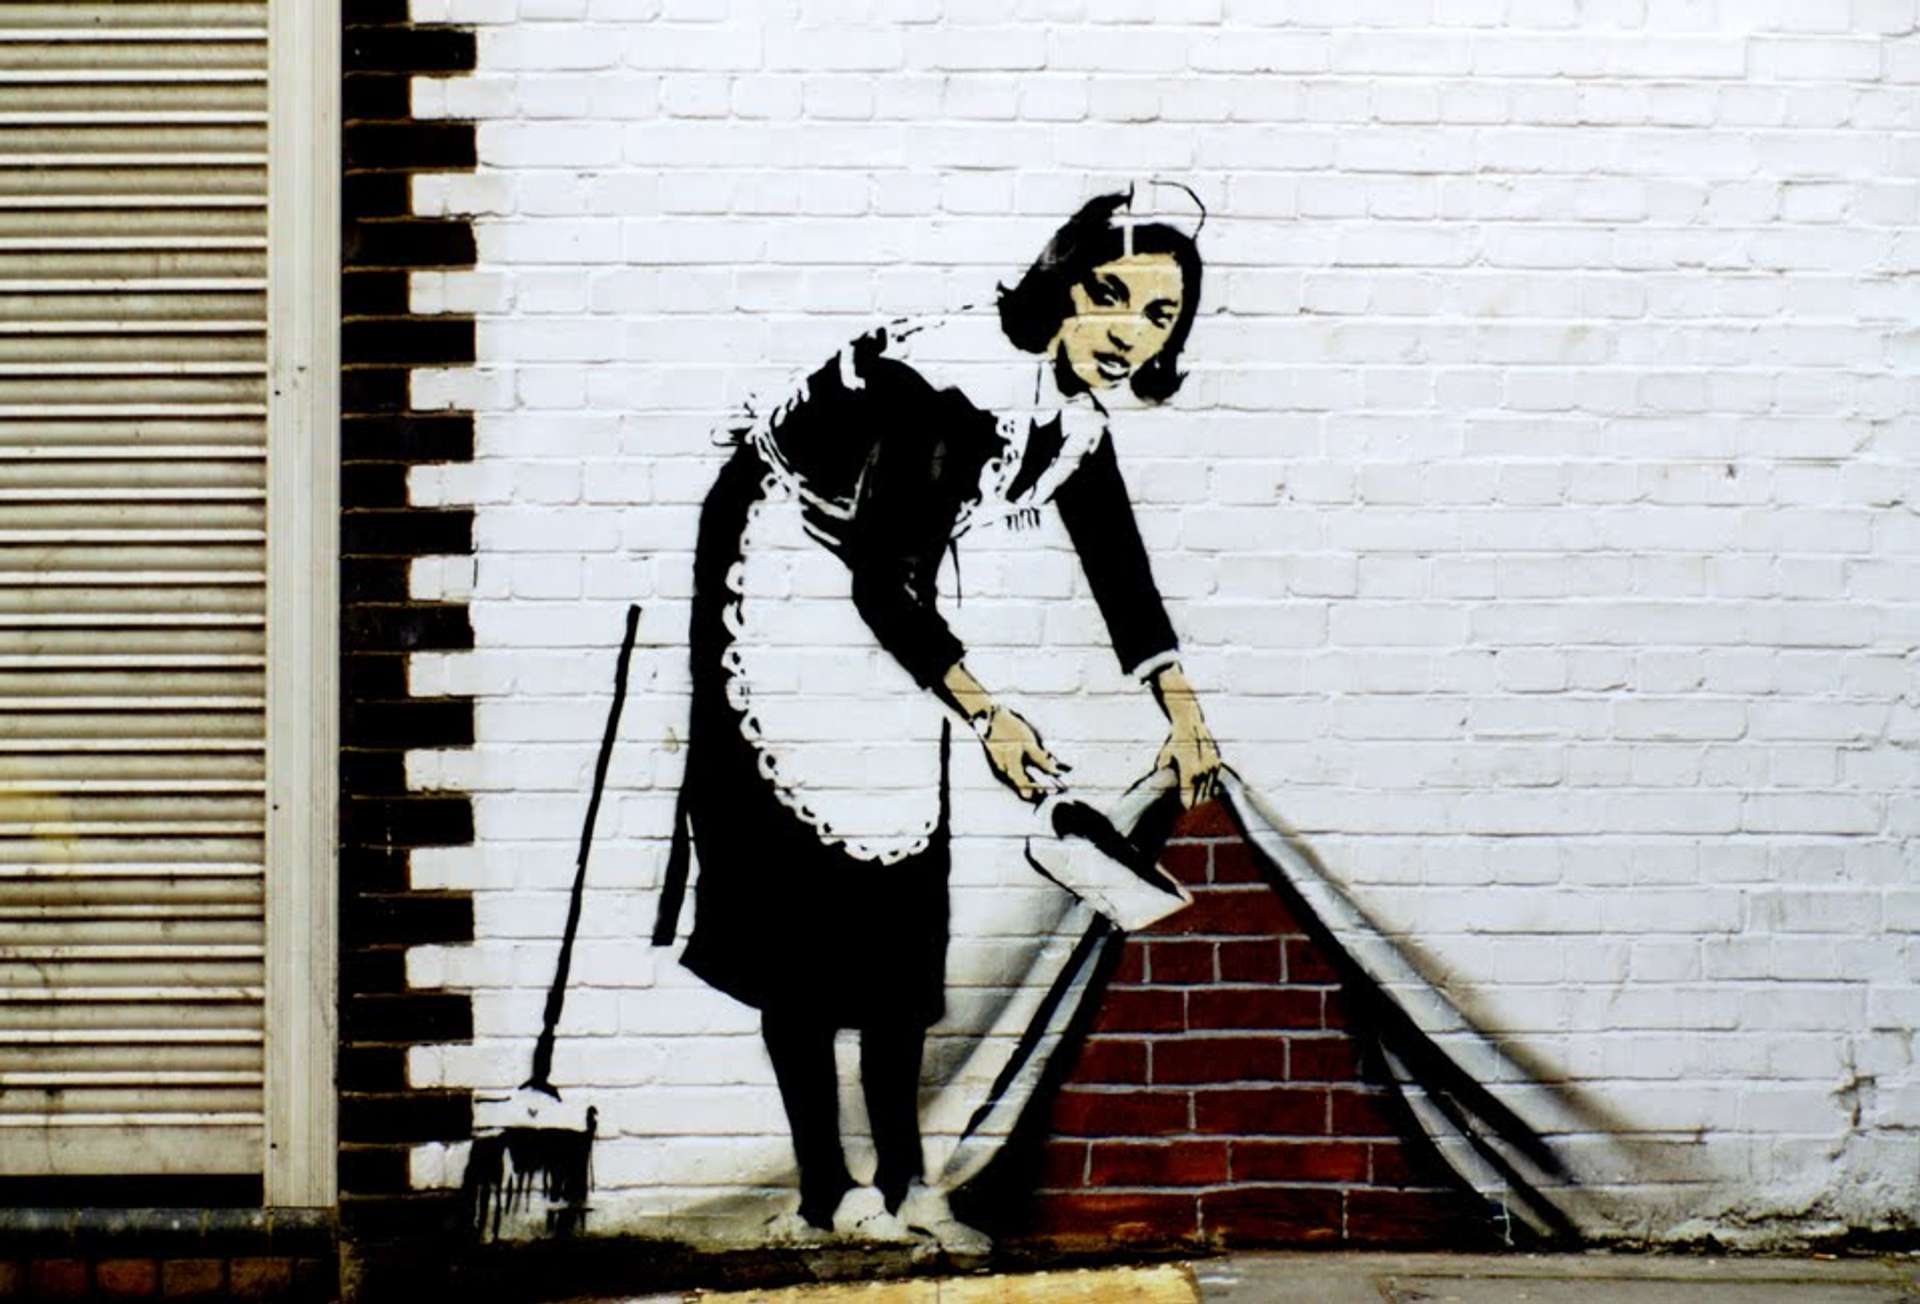 A street art mural by Banksy depicting a woman in a maid uniform, appearing to lift a white curtain to reveal the brick wall underneath where she discards her sweepings.